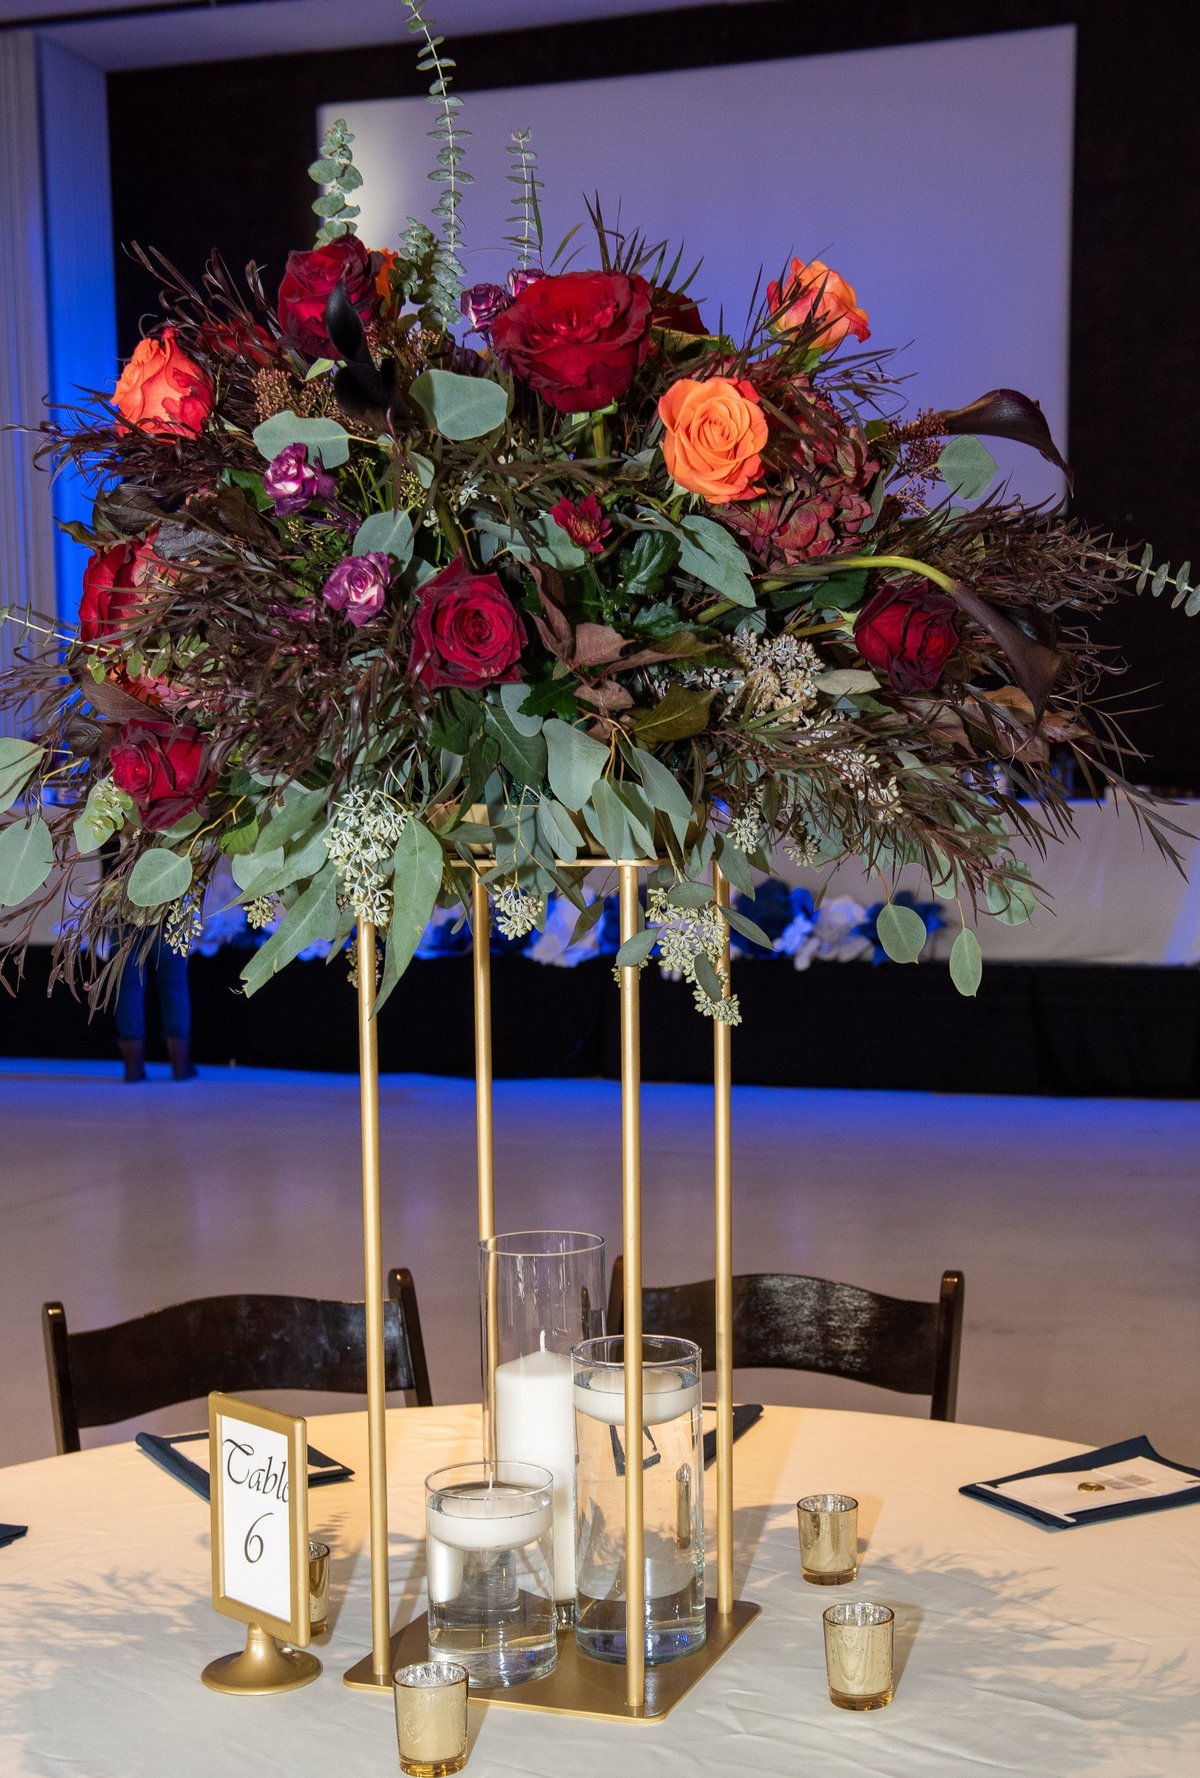 BKC4U WEDDING FLOWERS MOODY COLOR ROSE ELEVATED GOLD CENTERPIECE